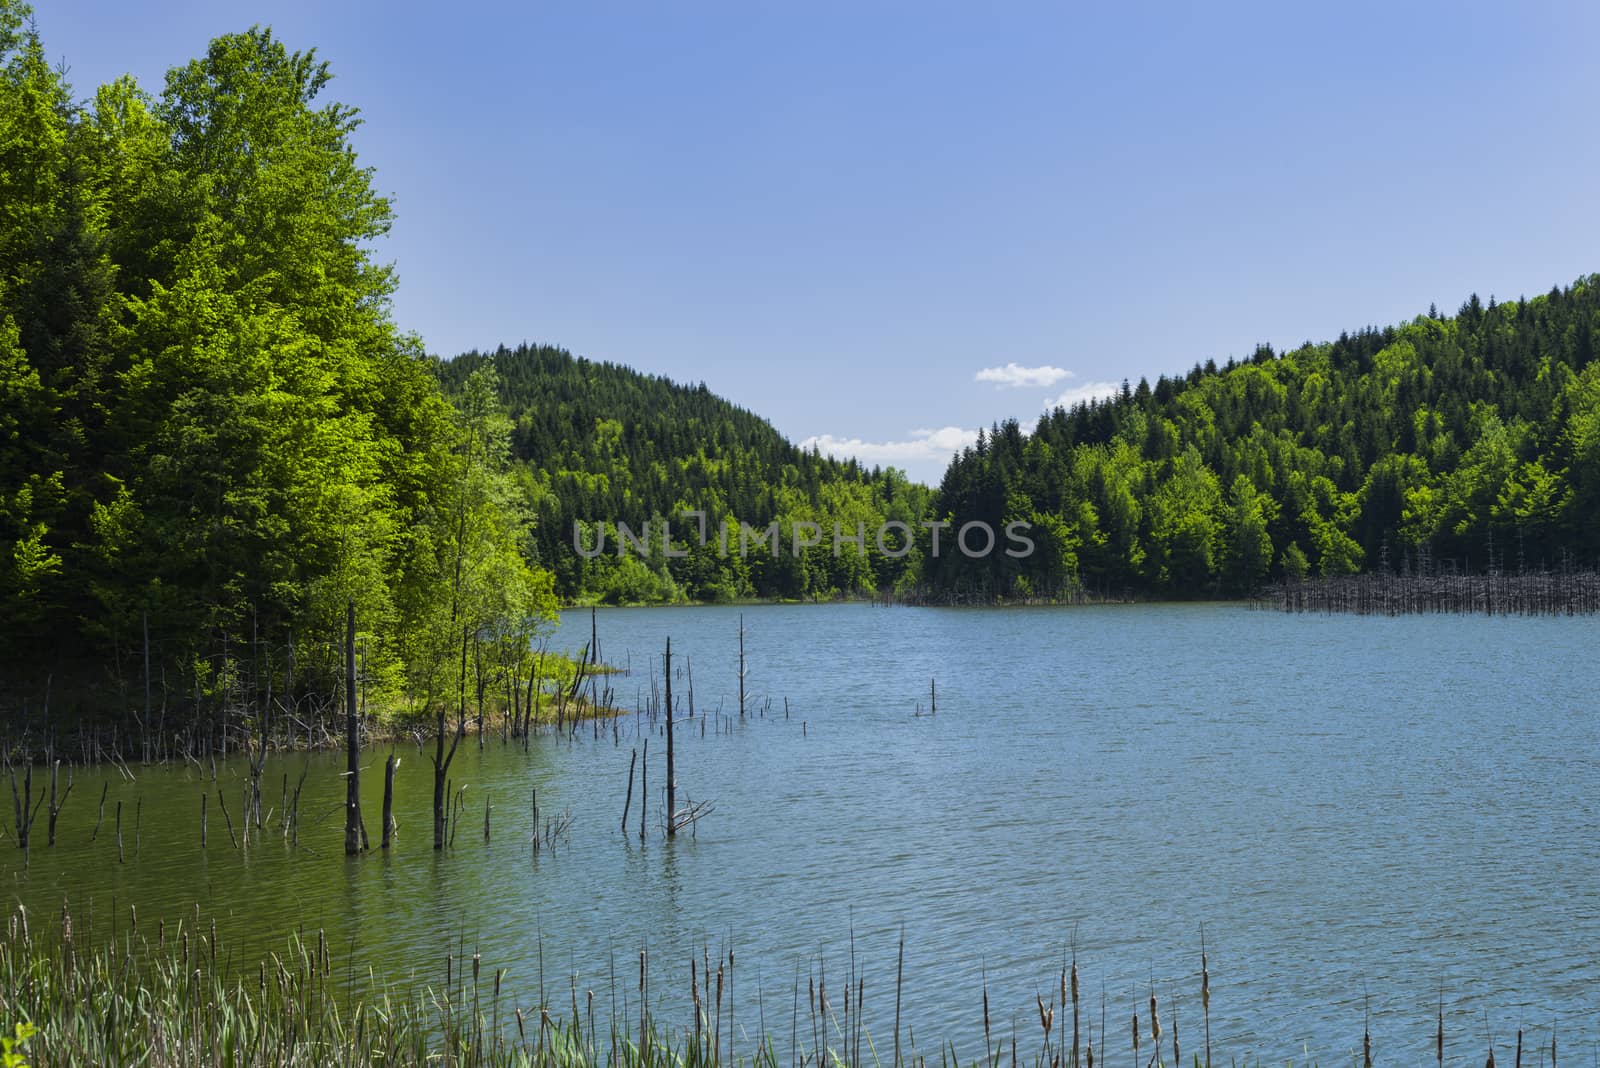 Natural dam lake in spring. Cuejdel lake is the biggest natural dam lake in Romania. It has its origins in a landfall that blocked the entire valley.